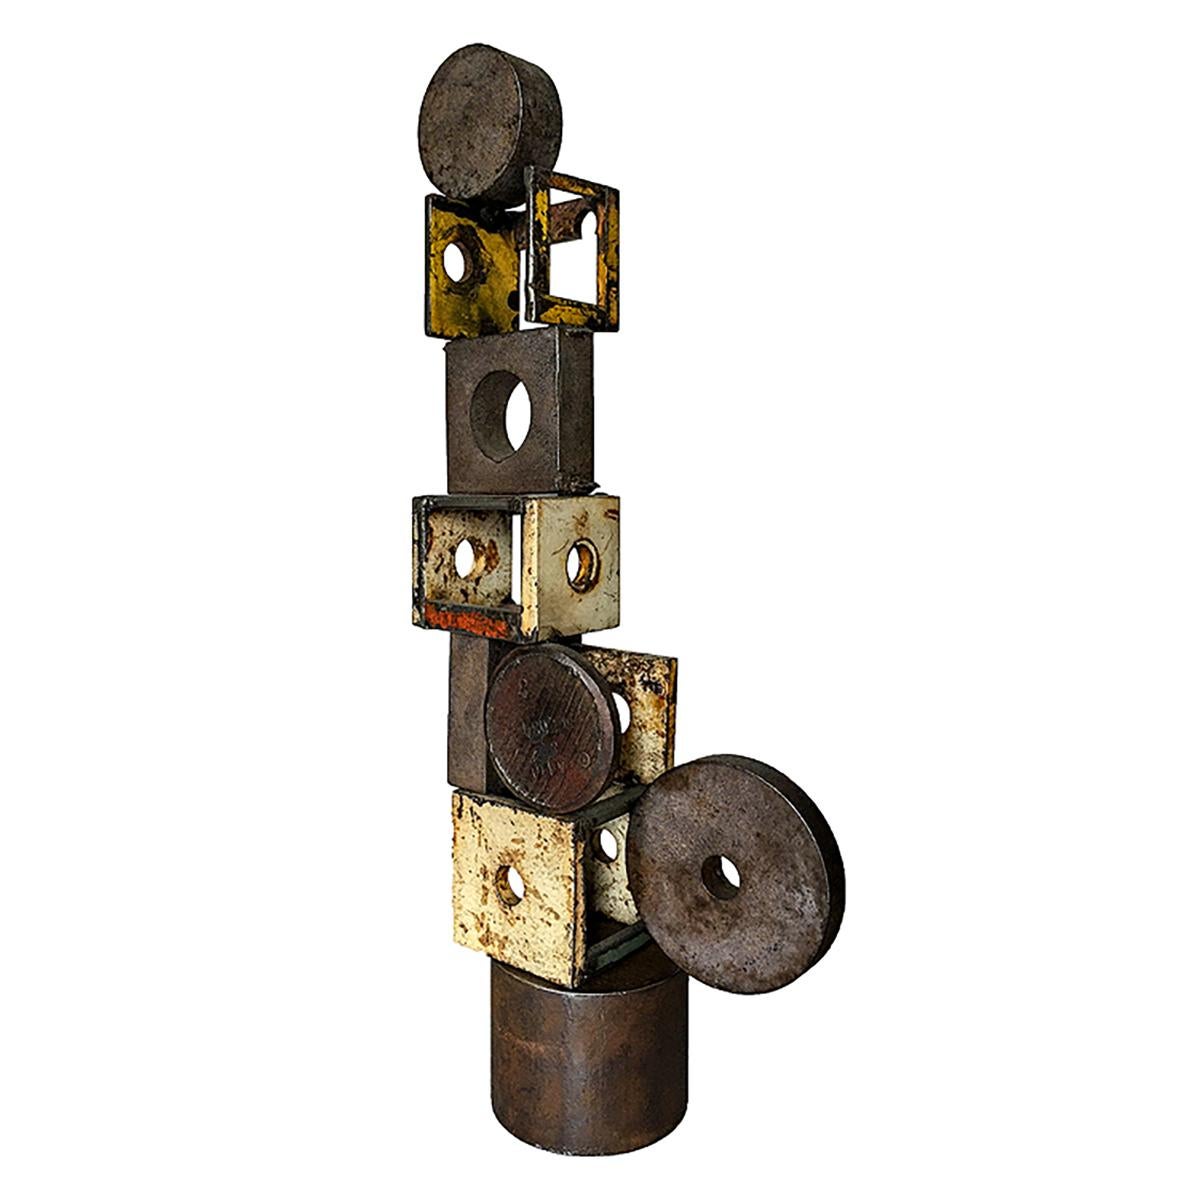 Jim Rose Abstract Sculpture - Object 1983, Steel Structure, Welded Sculptural Object Made w/ Salvaged Steel